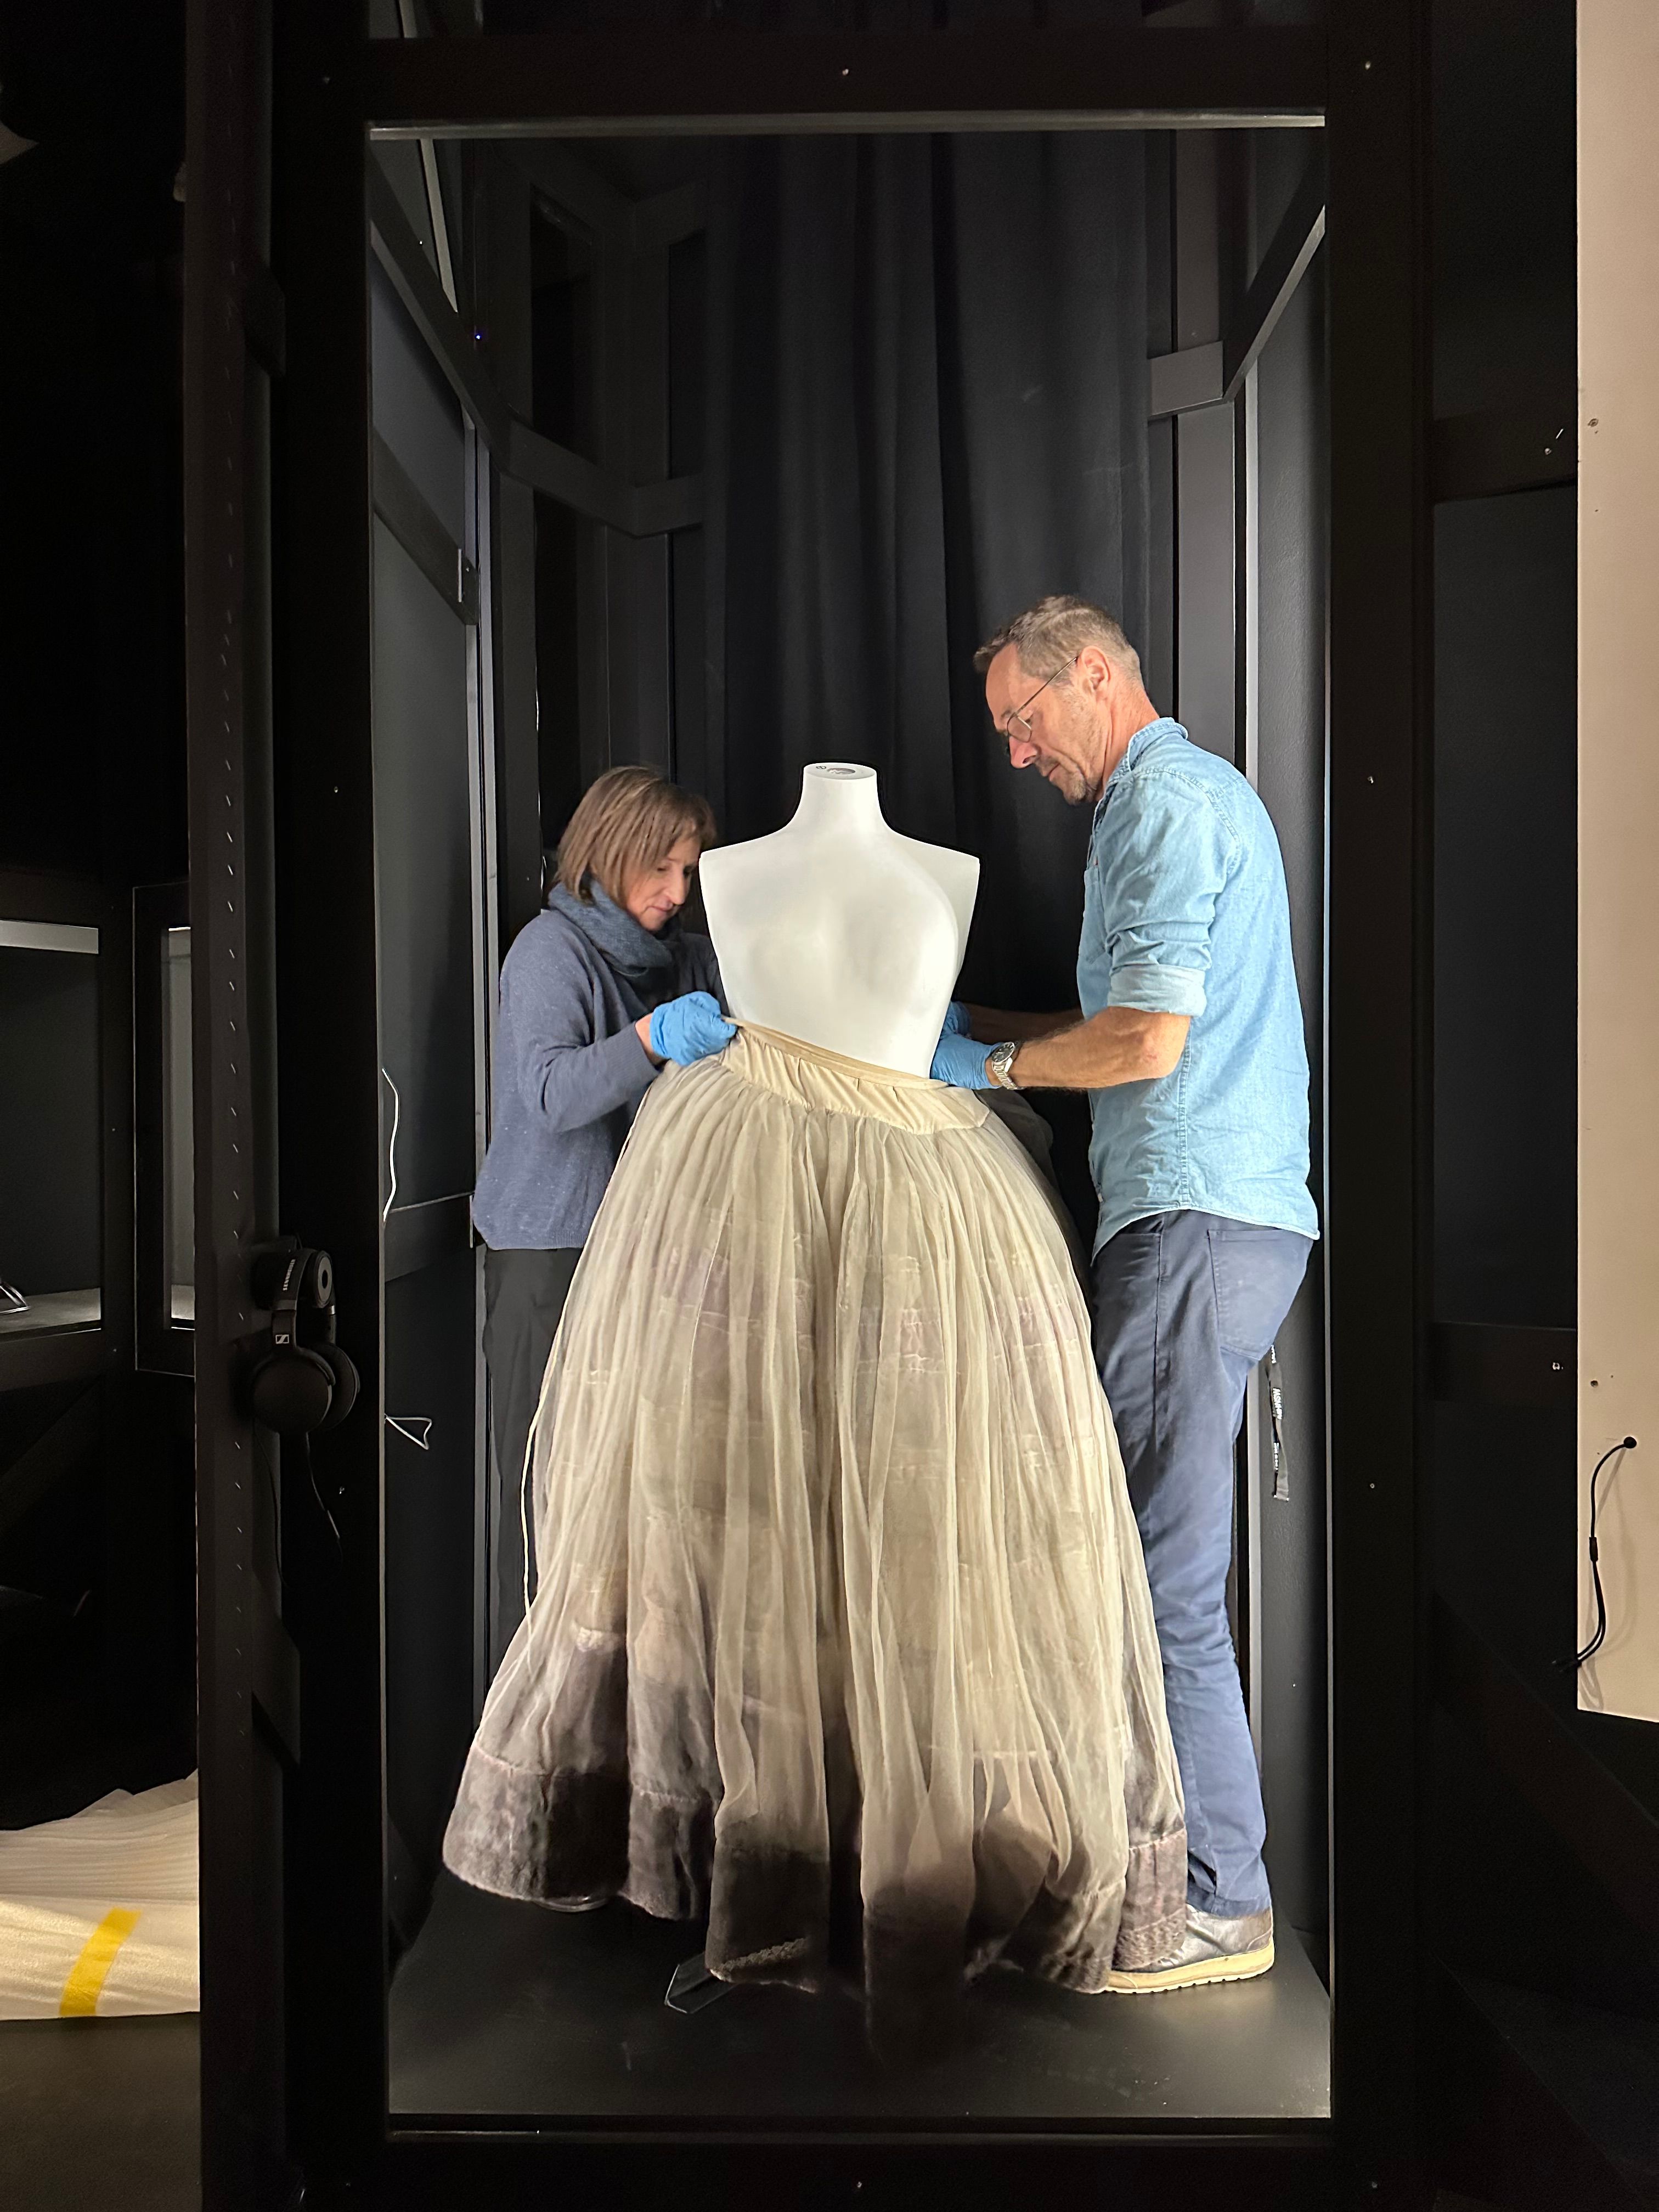 A full-length petticoat, coloured off-white with a darker toned band across its base, is being placed on a mannequin by two people, inside a narrow display compartment within an exhibition space.